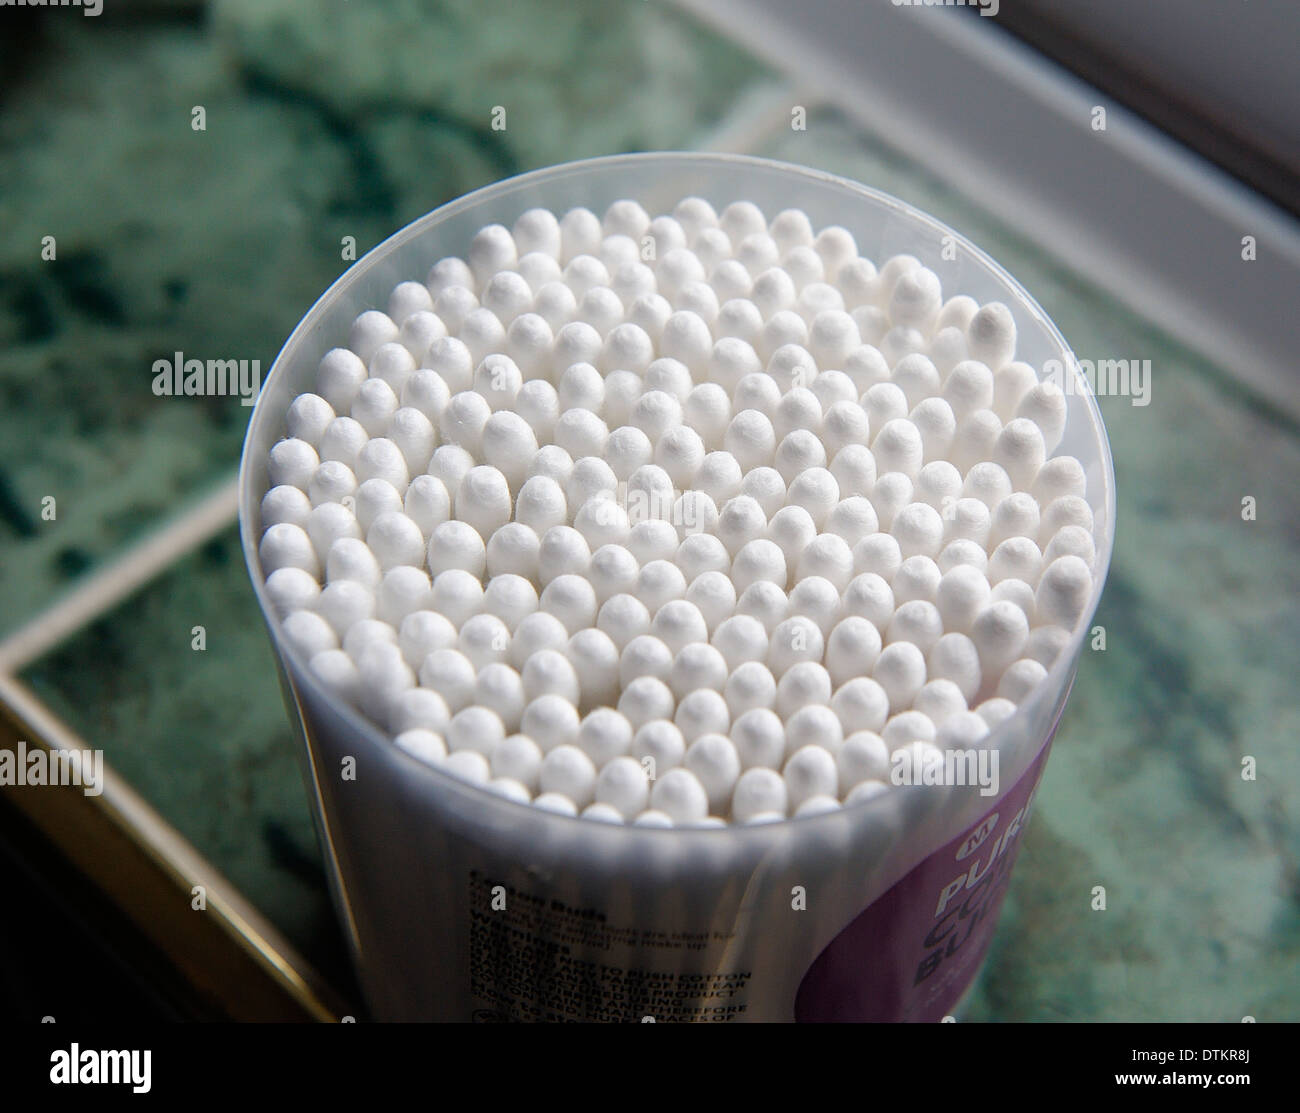 A tub of cotton ear buds Stock Photo